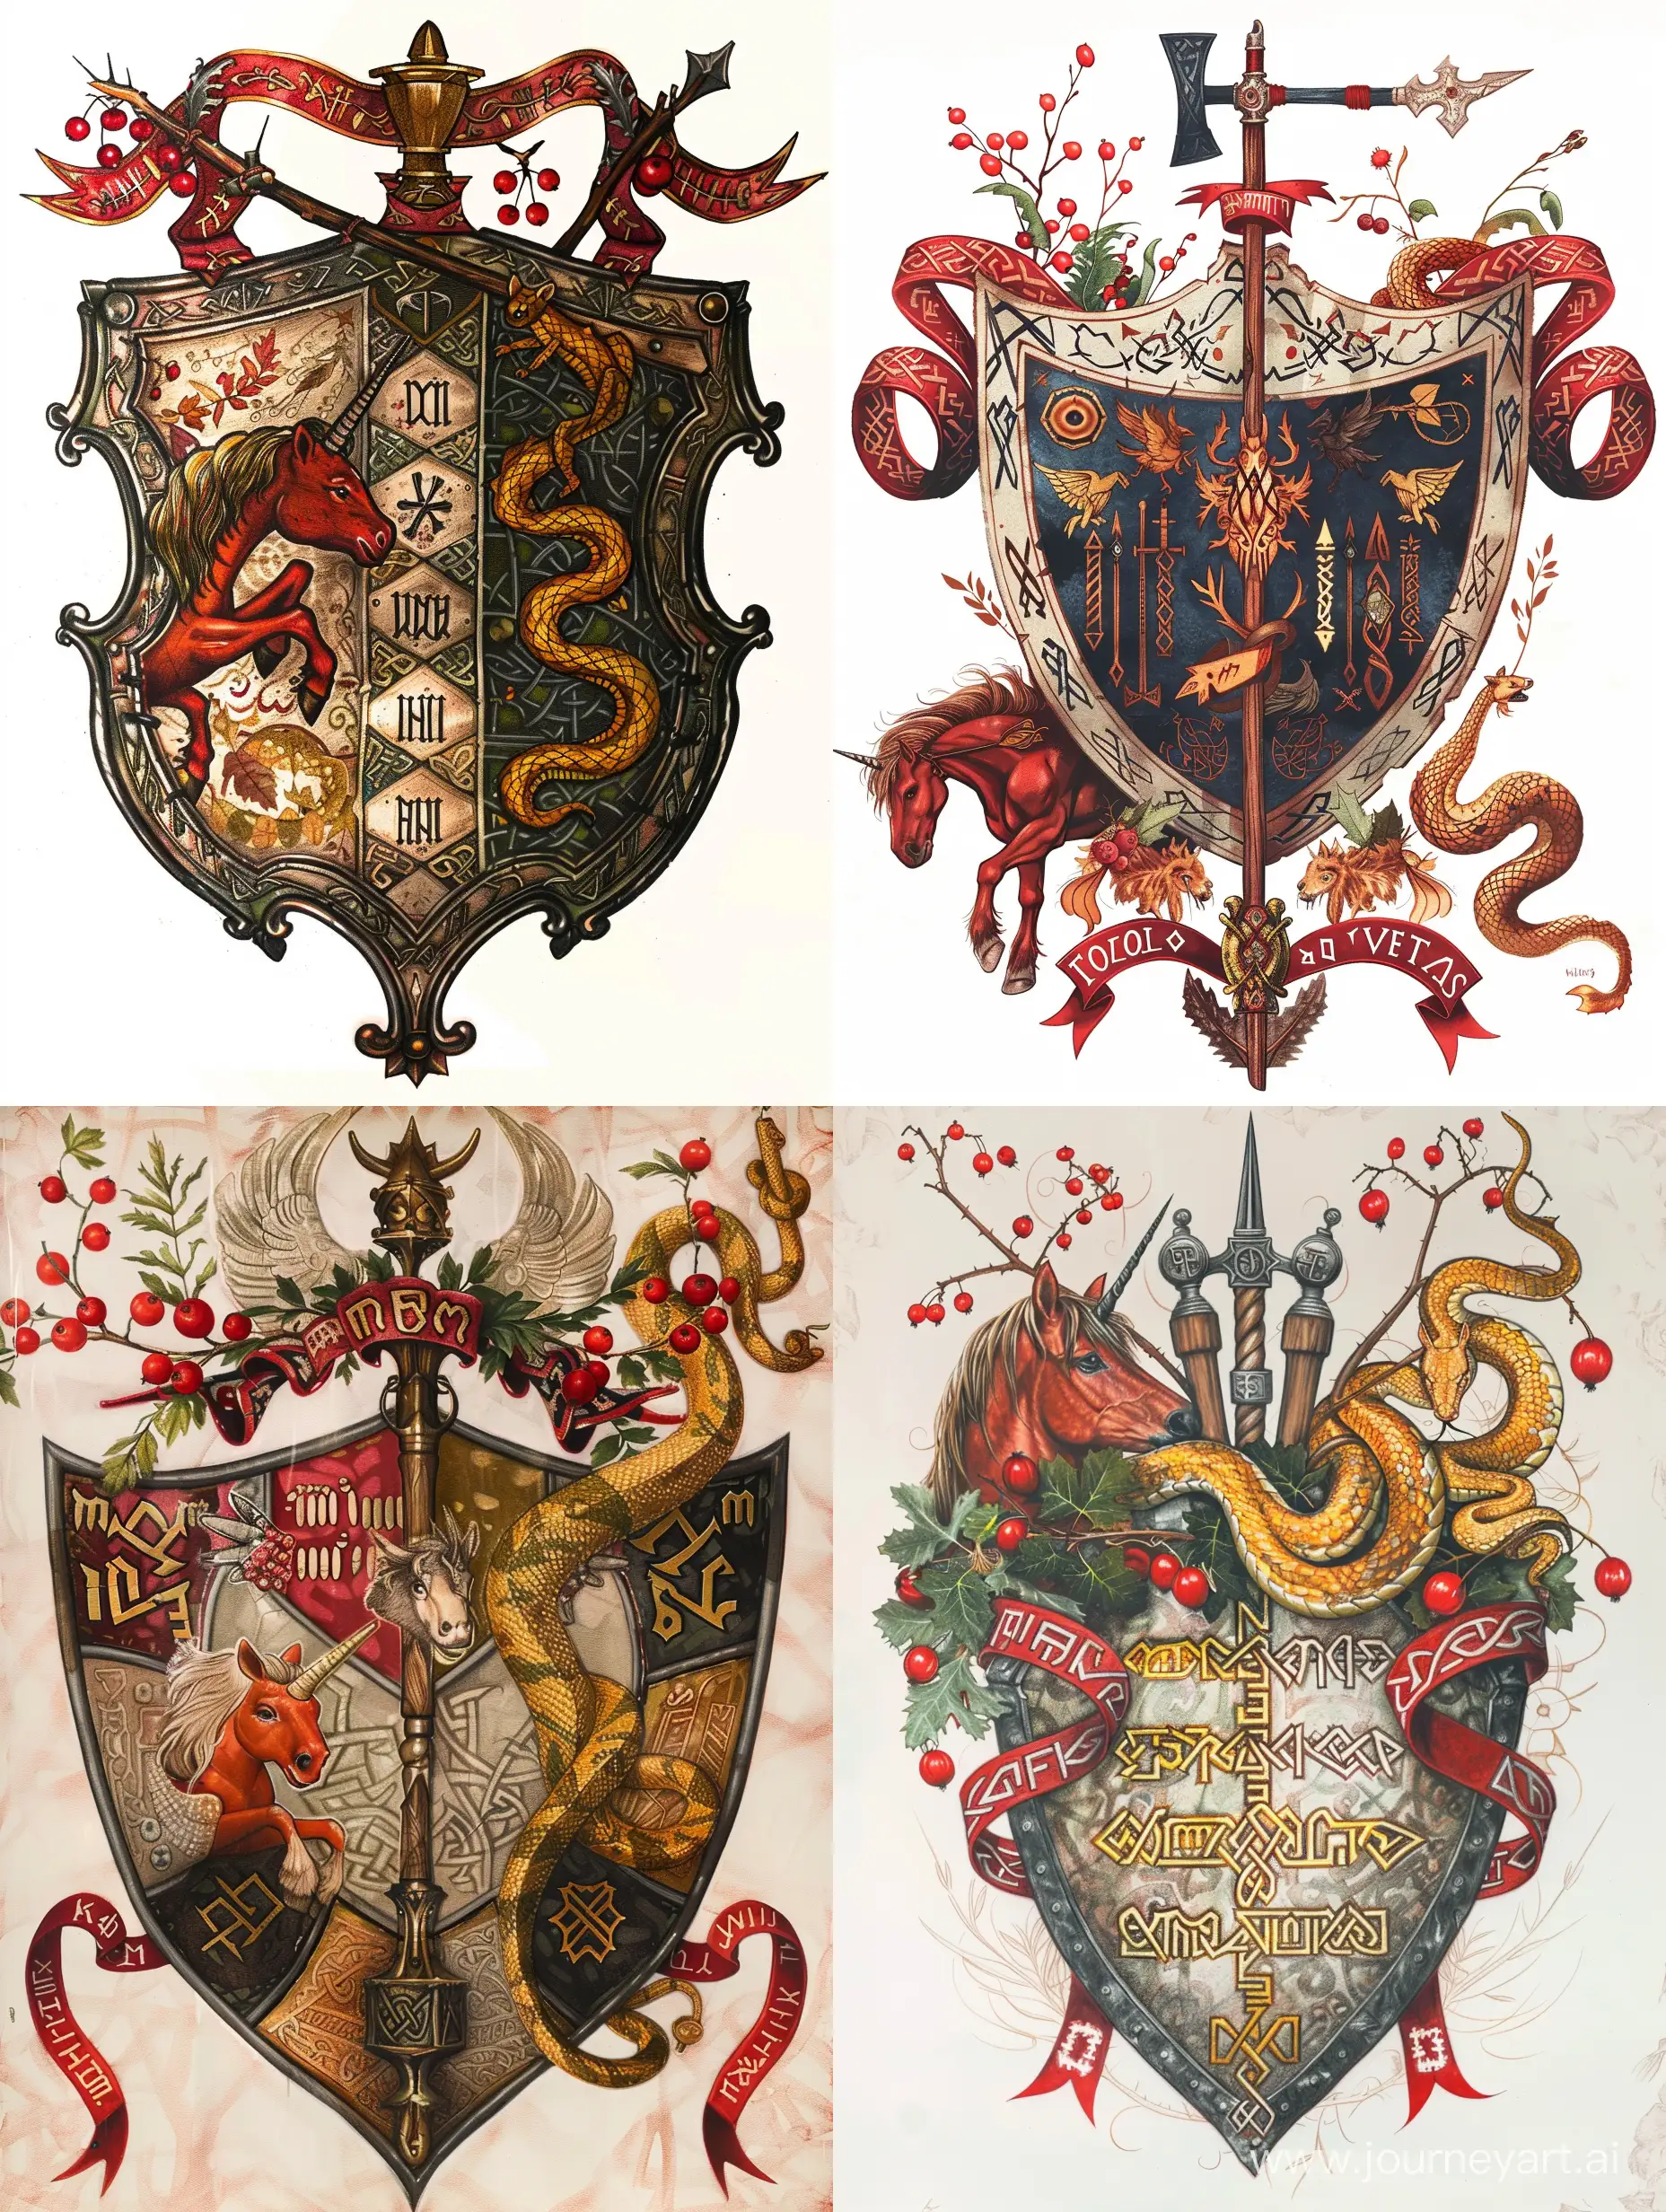 the family coat of arms on the shield, Celtic heraldry, runes on a scarlet ribbon, a golden snake on the right, a druid's staff in the middle, a red unicorn on the left, rosehip and elder branches at the top